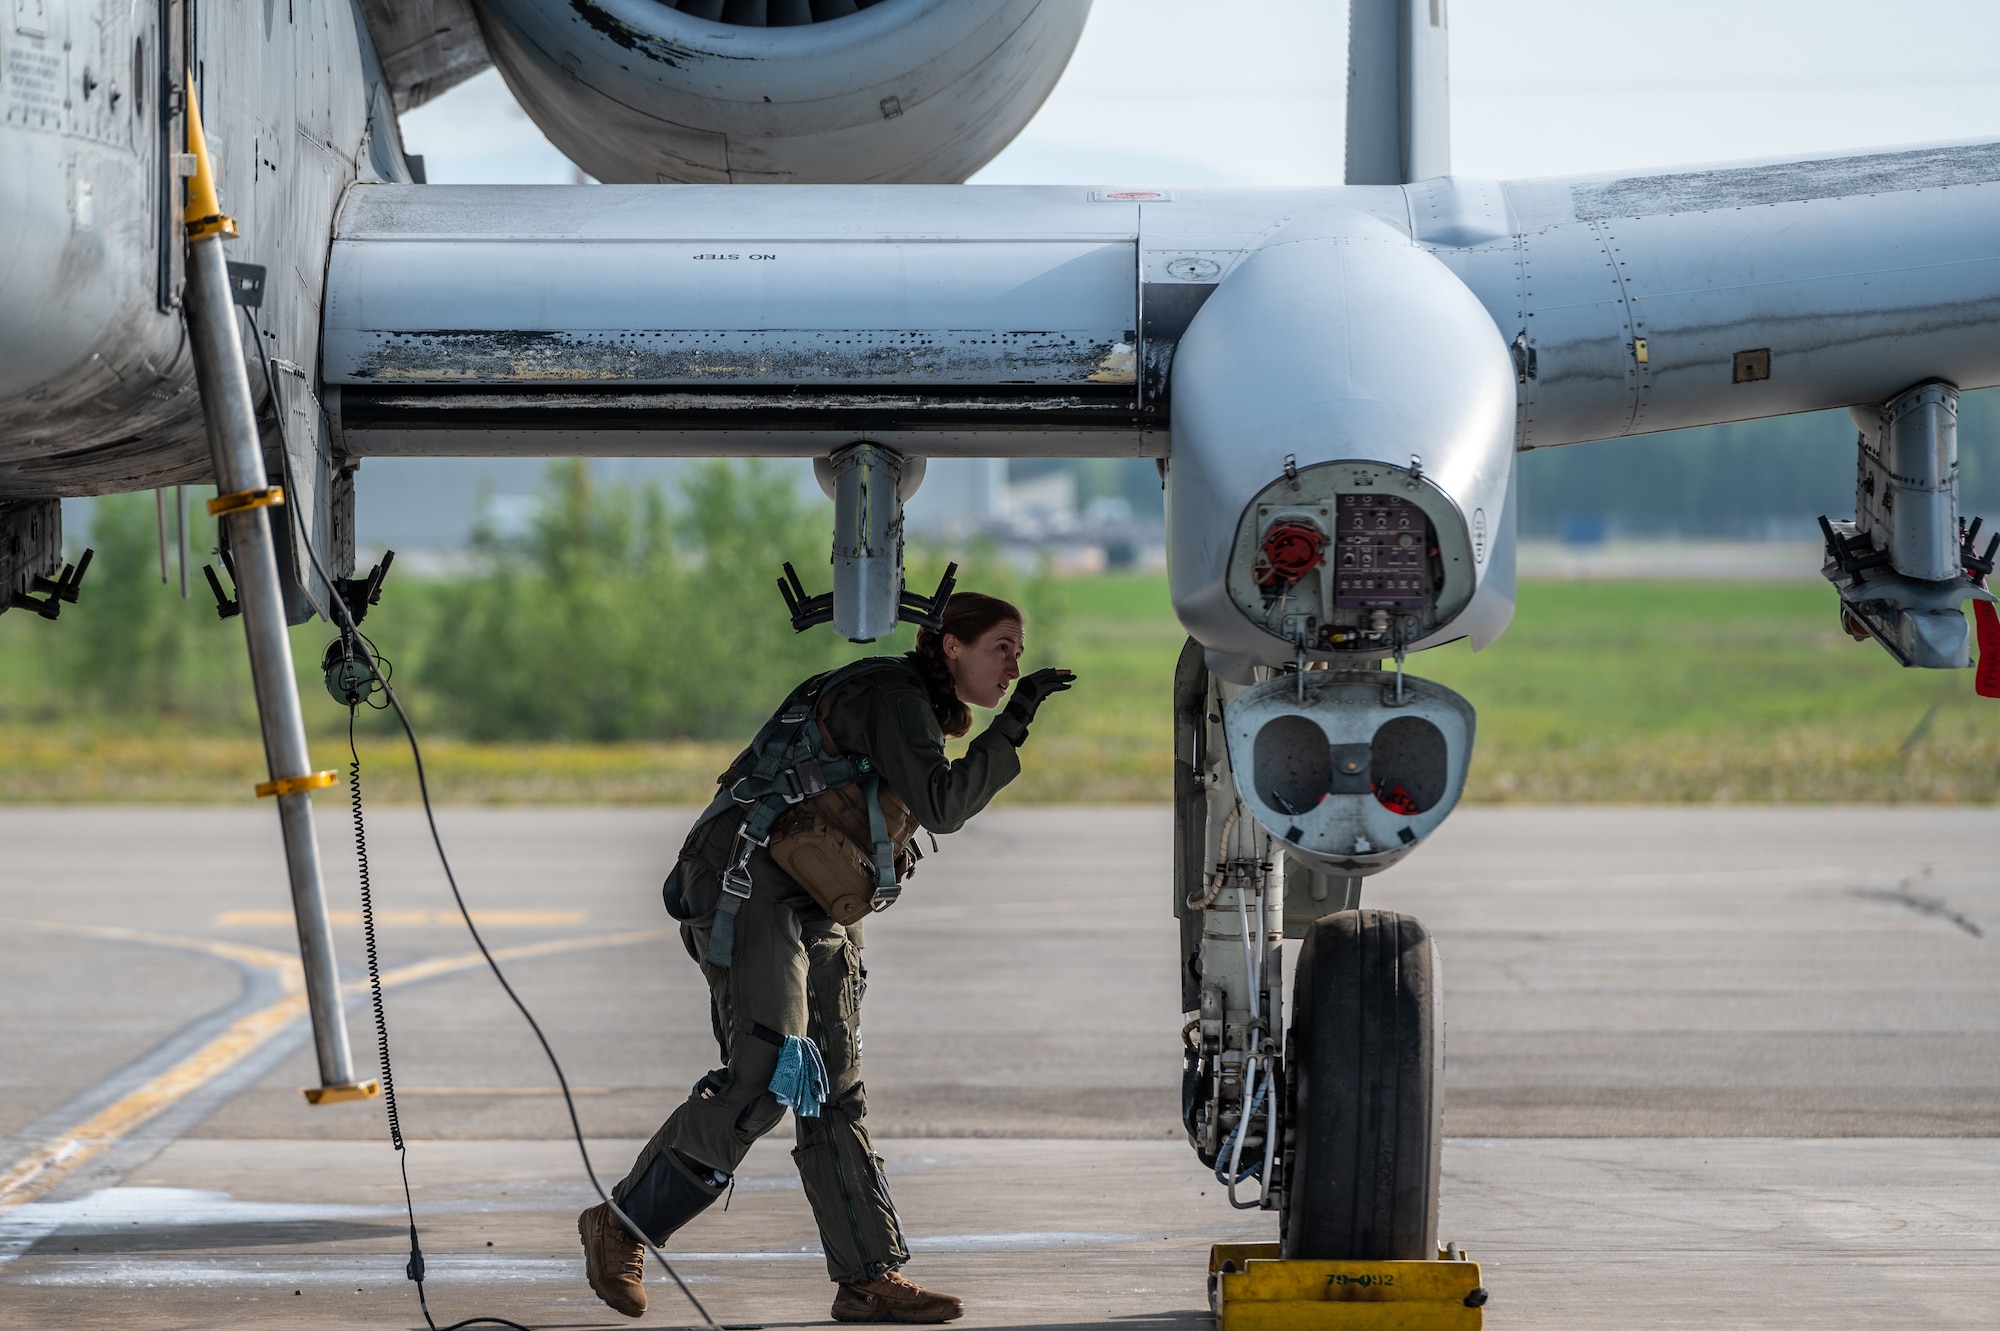 U.S. Air Force Capt. Colleen “Cloud” Engelbrecht, 25th Fighter Squadron pilot, inspects the exterior of an A-10 Thunderbolt II